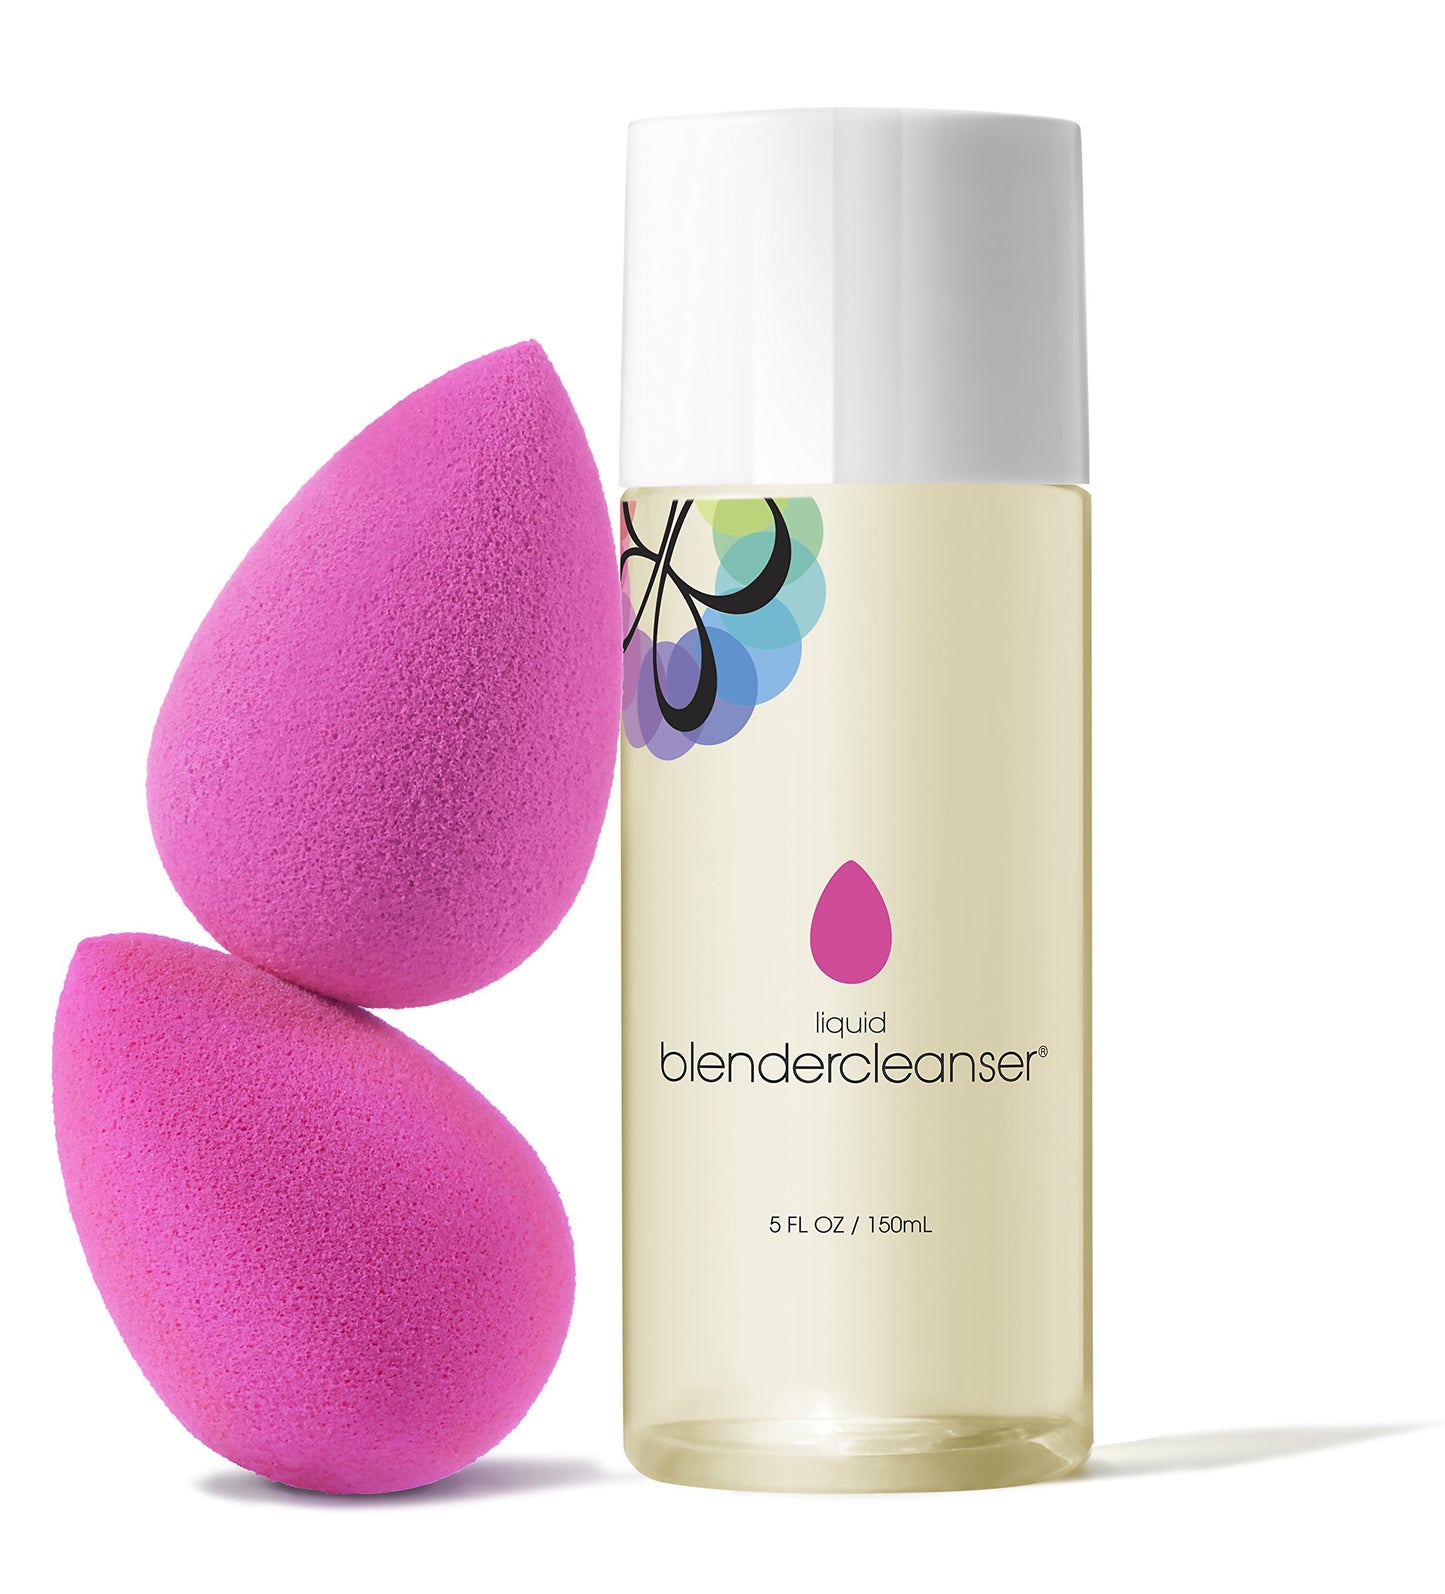 Beautyblender Two.bb.clean with Cleanser (Limited Edition)